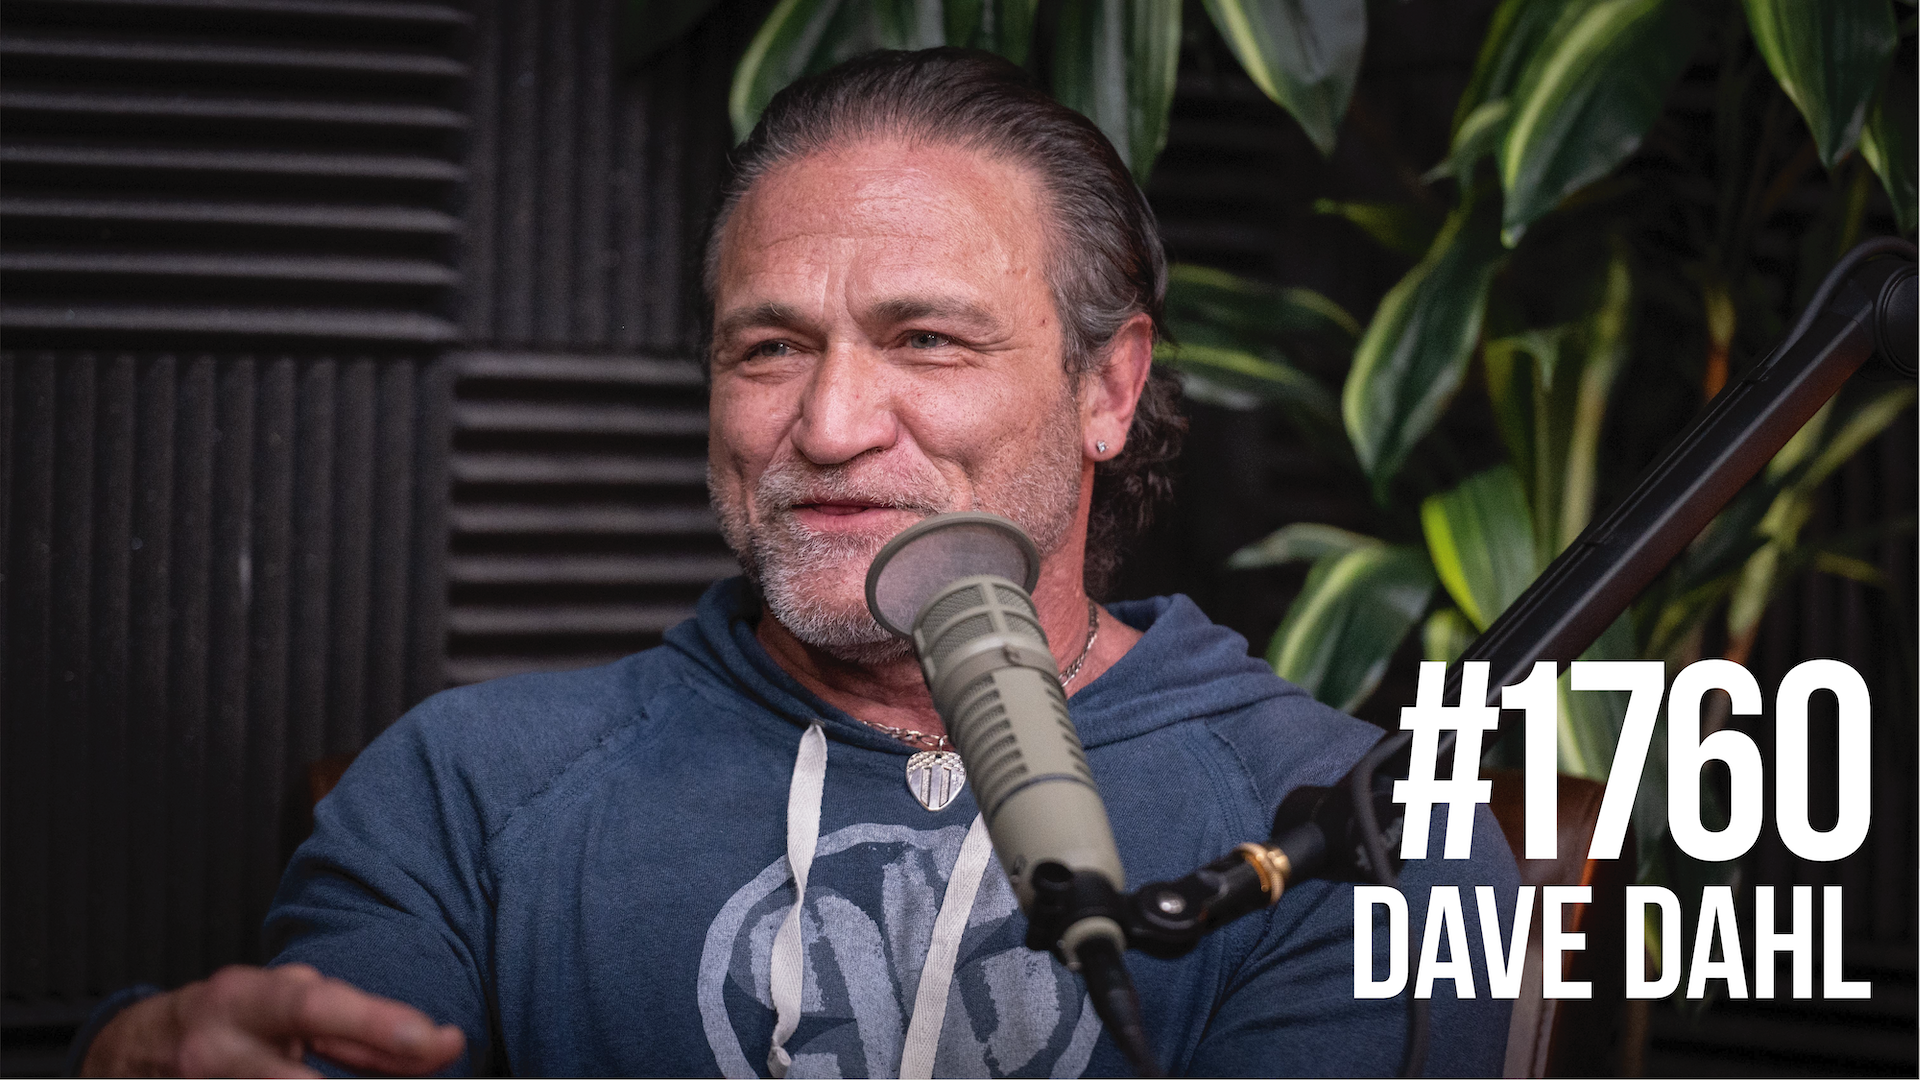 1760: From Prison to Prosperity With Dave Dahl of Dave’s Killer Bread